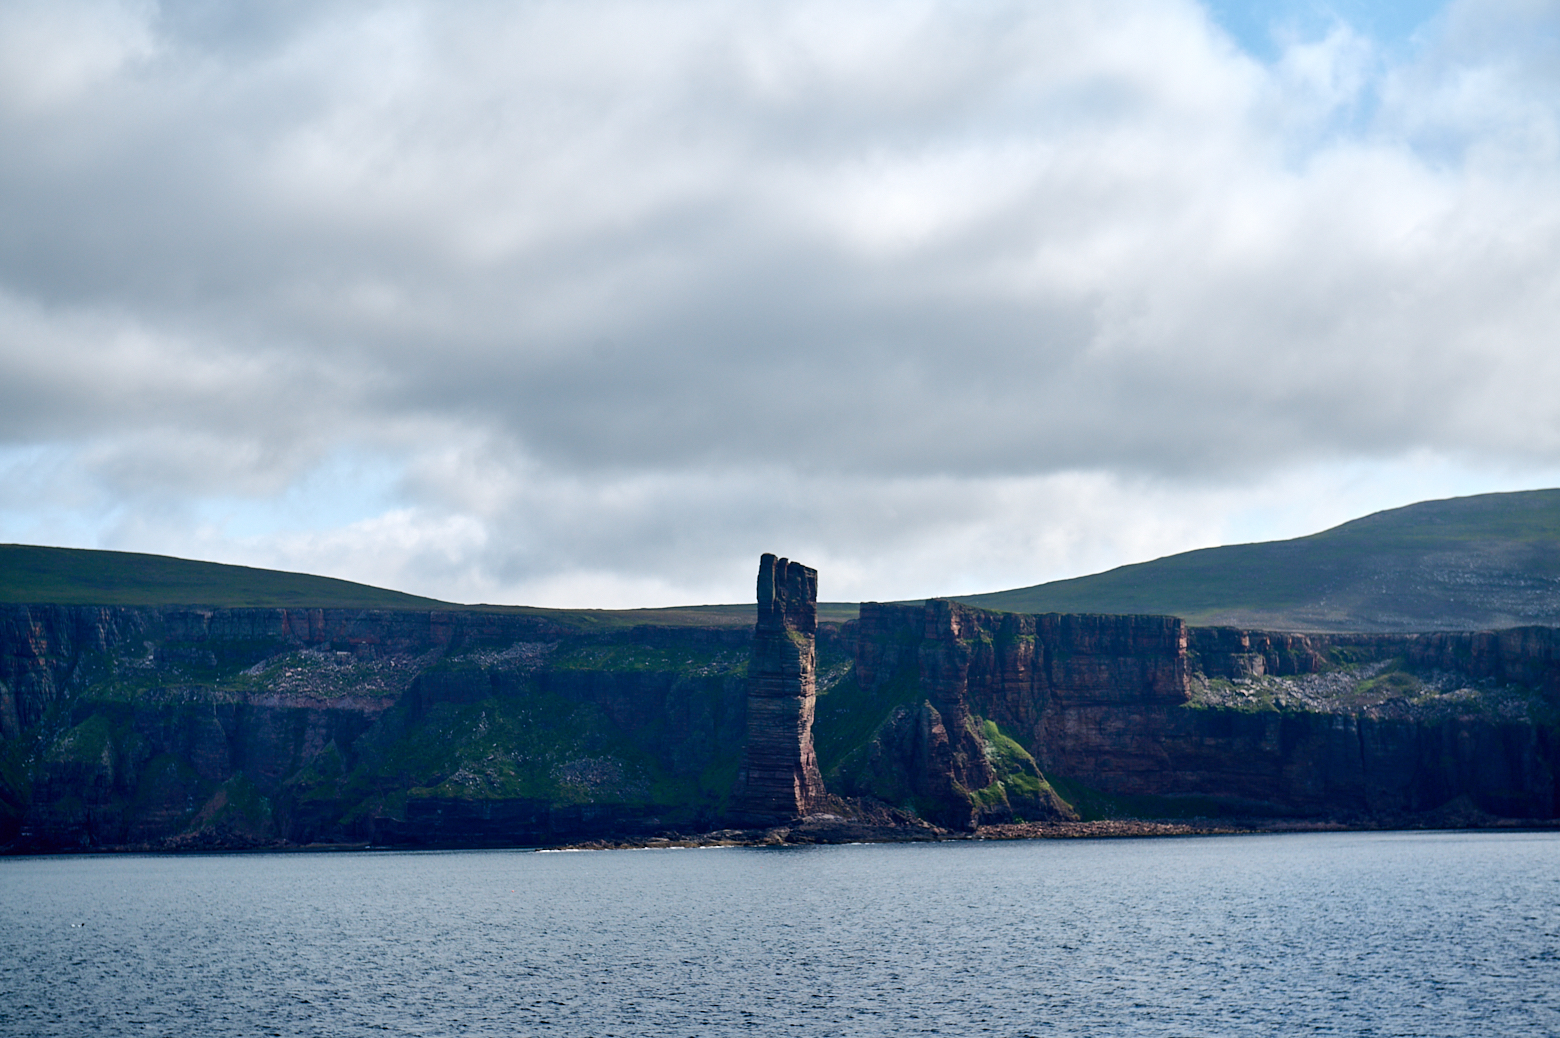 Leaving Orkney and sailing next to the Old Man of Hoy.